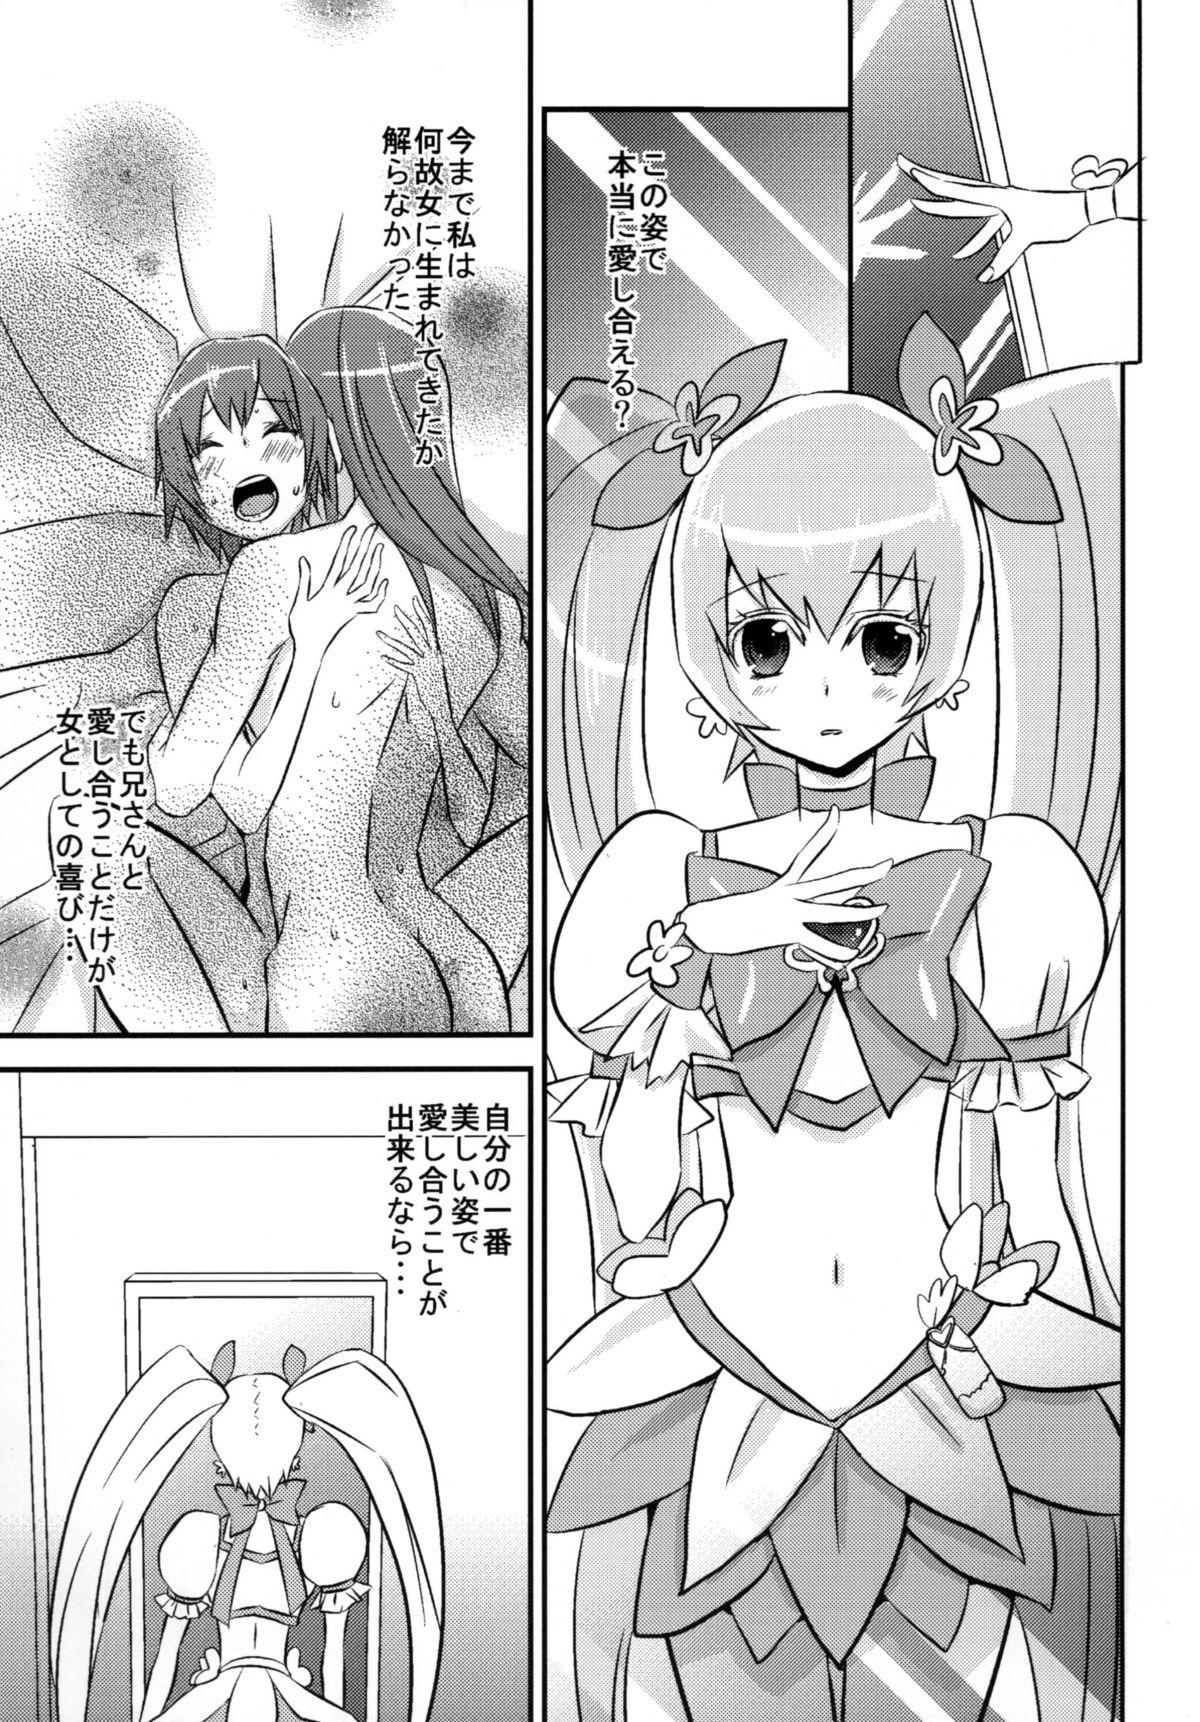 Oldvsyoung Munekyun Sunshine - Heartcatch precure Belly - Page 6